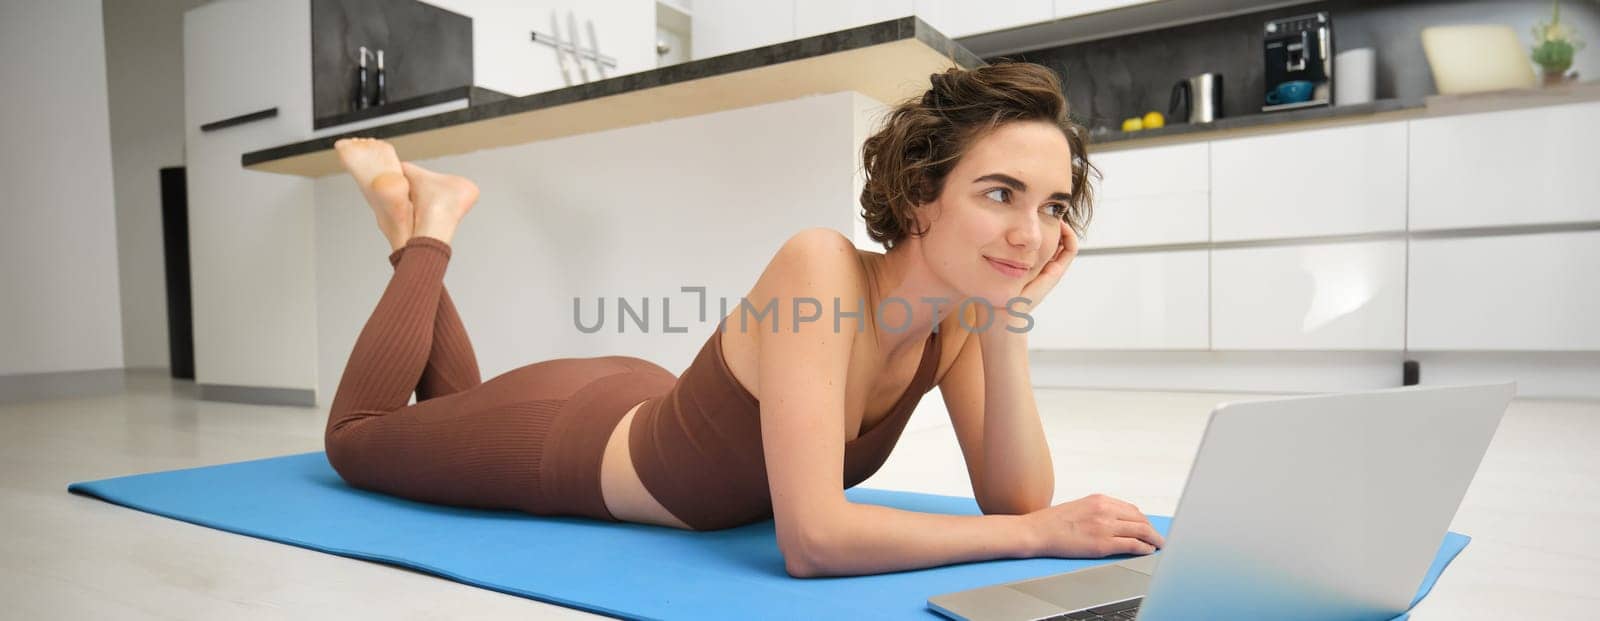 Portrait of woman athlete, girl workout at home, watches fitness videos on laptop, lying on rubber mat and doing indoor yoga session. Sport and wellbeing concept